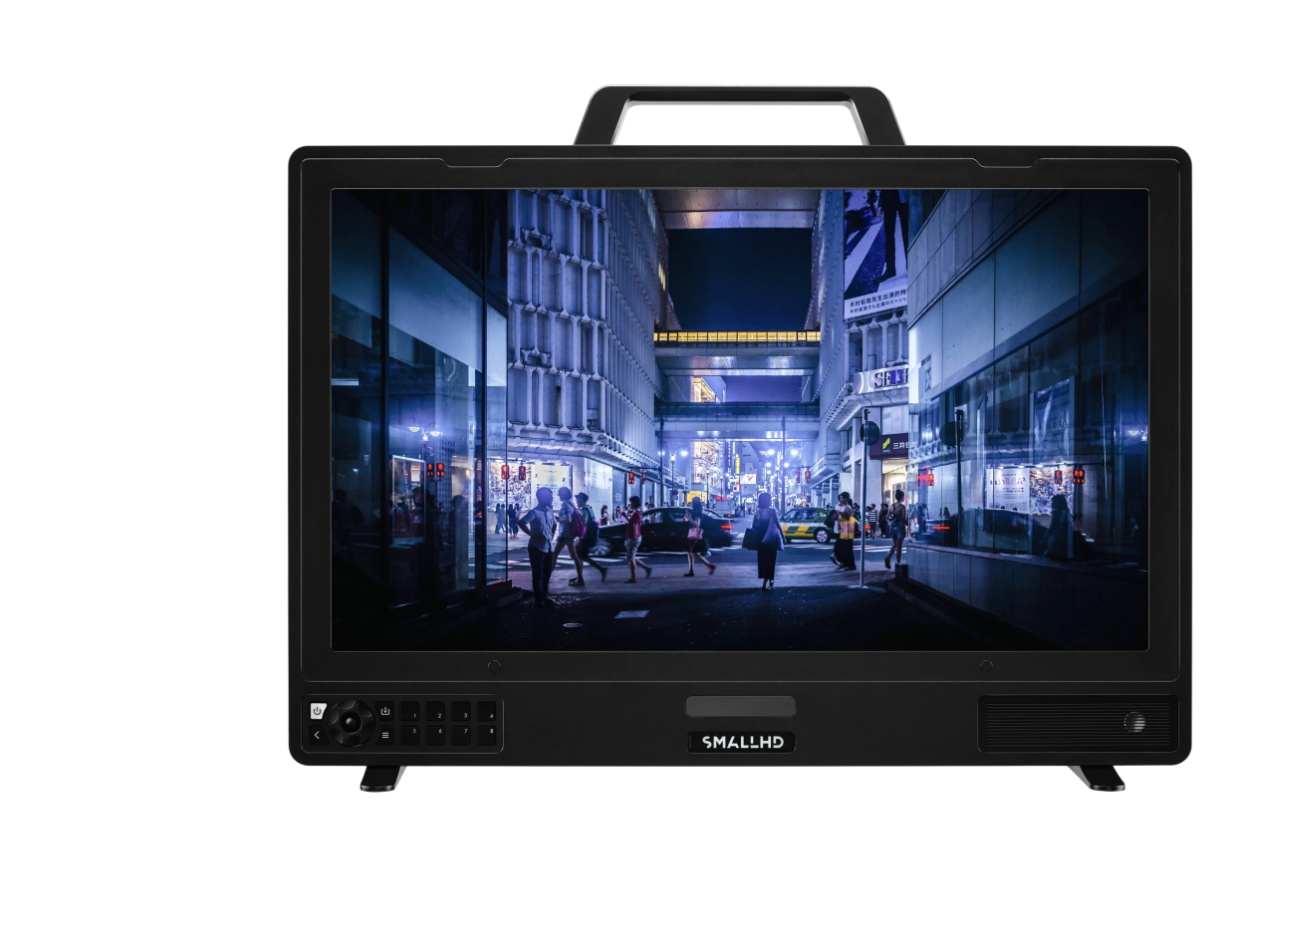 22" Reference Monitor shipping - Newsshooter